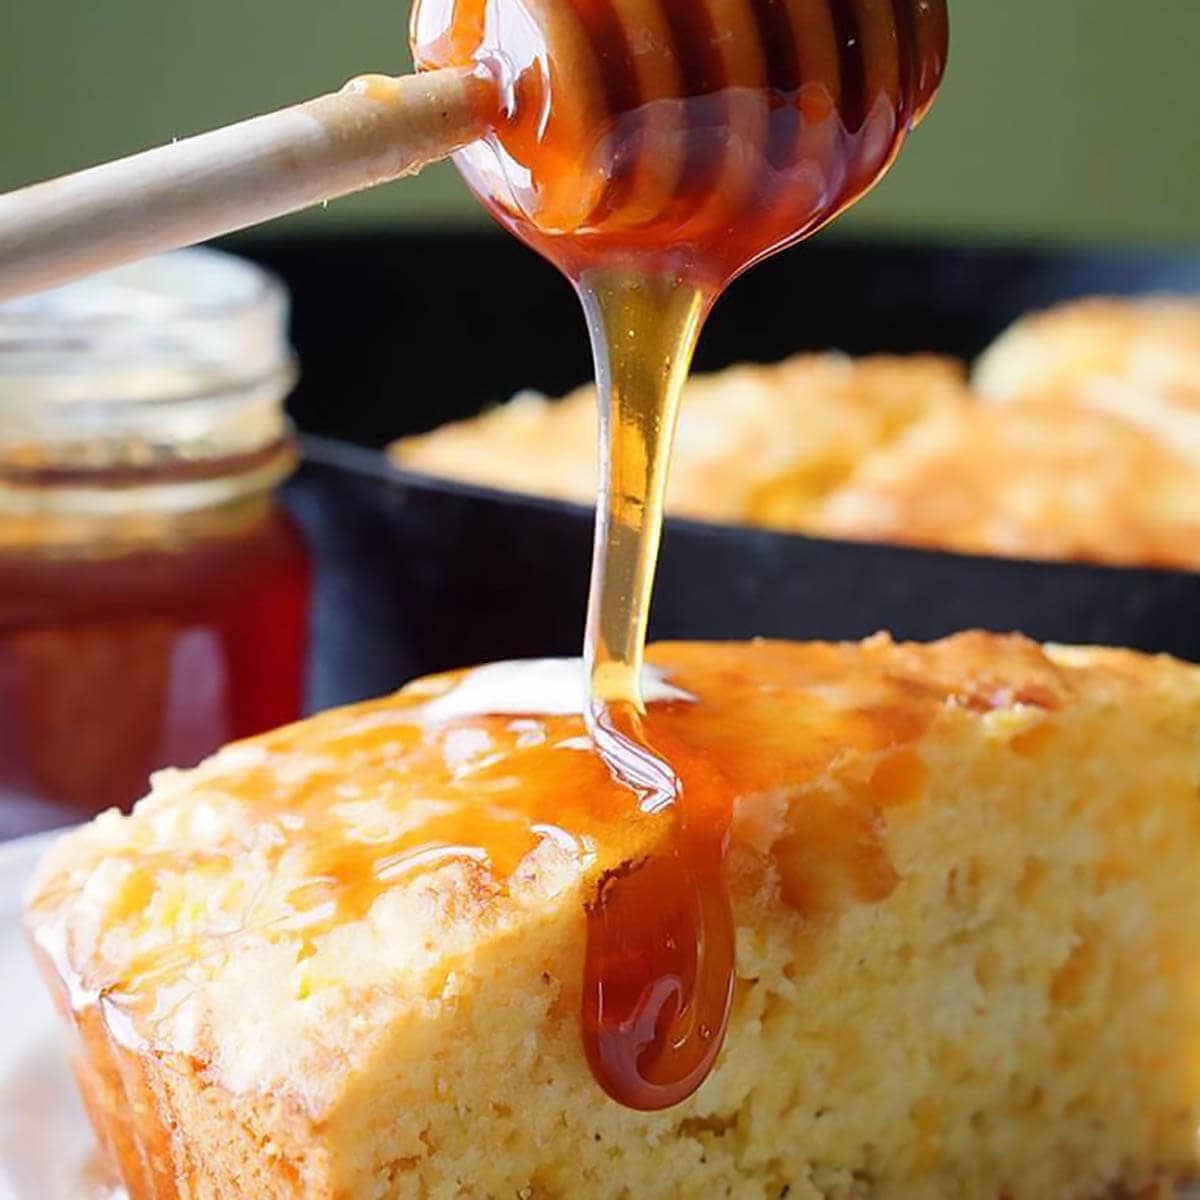 Cornbread with honey being drizzled over the top and sides.